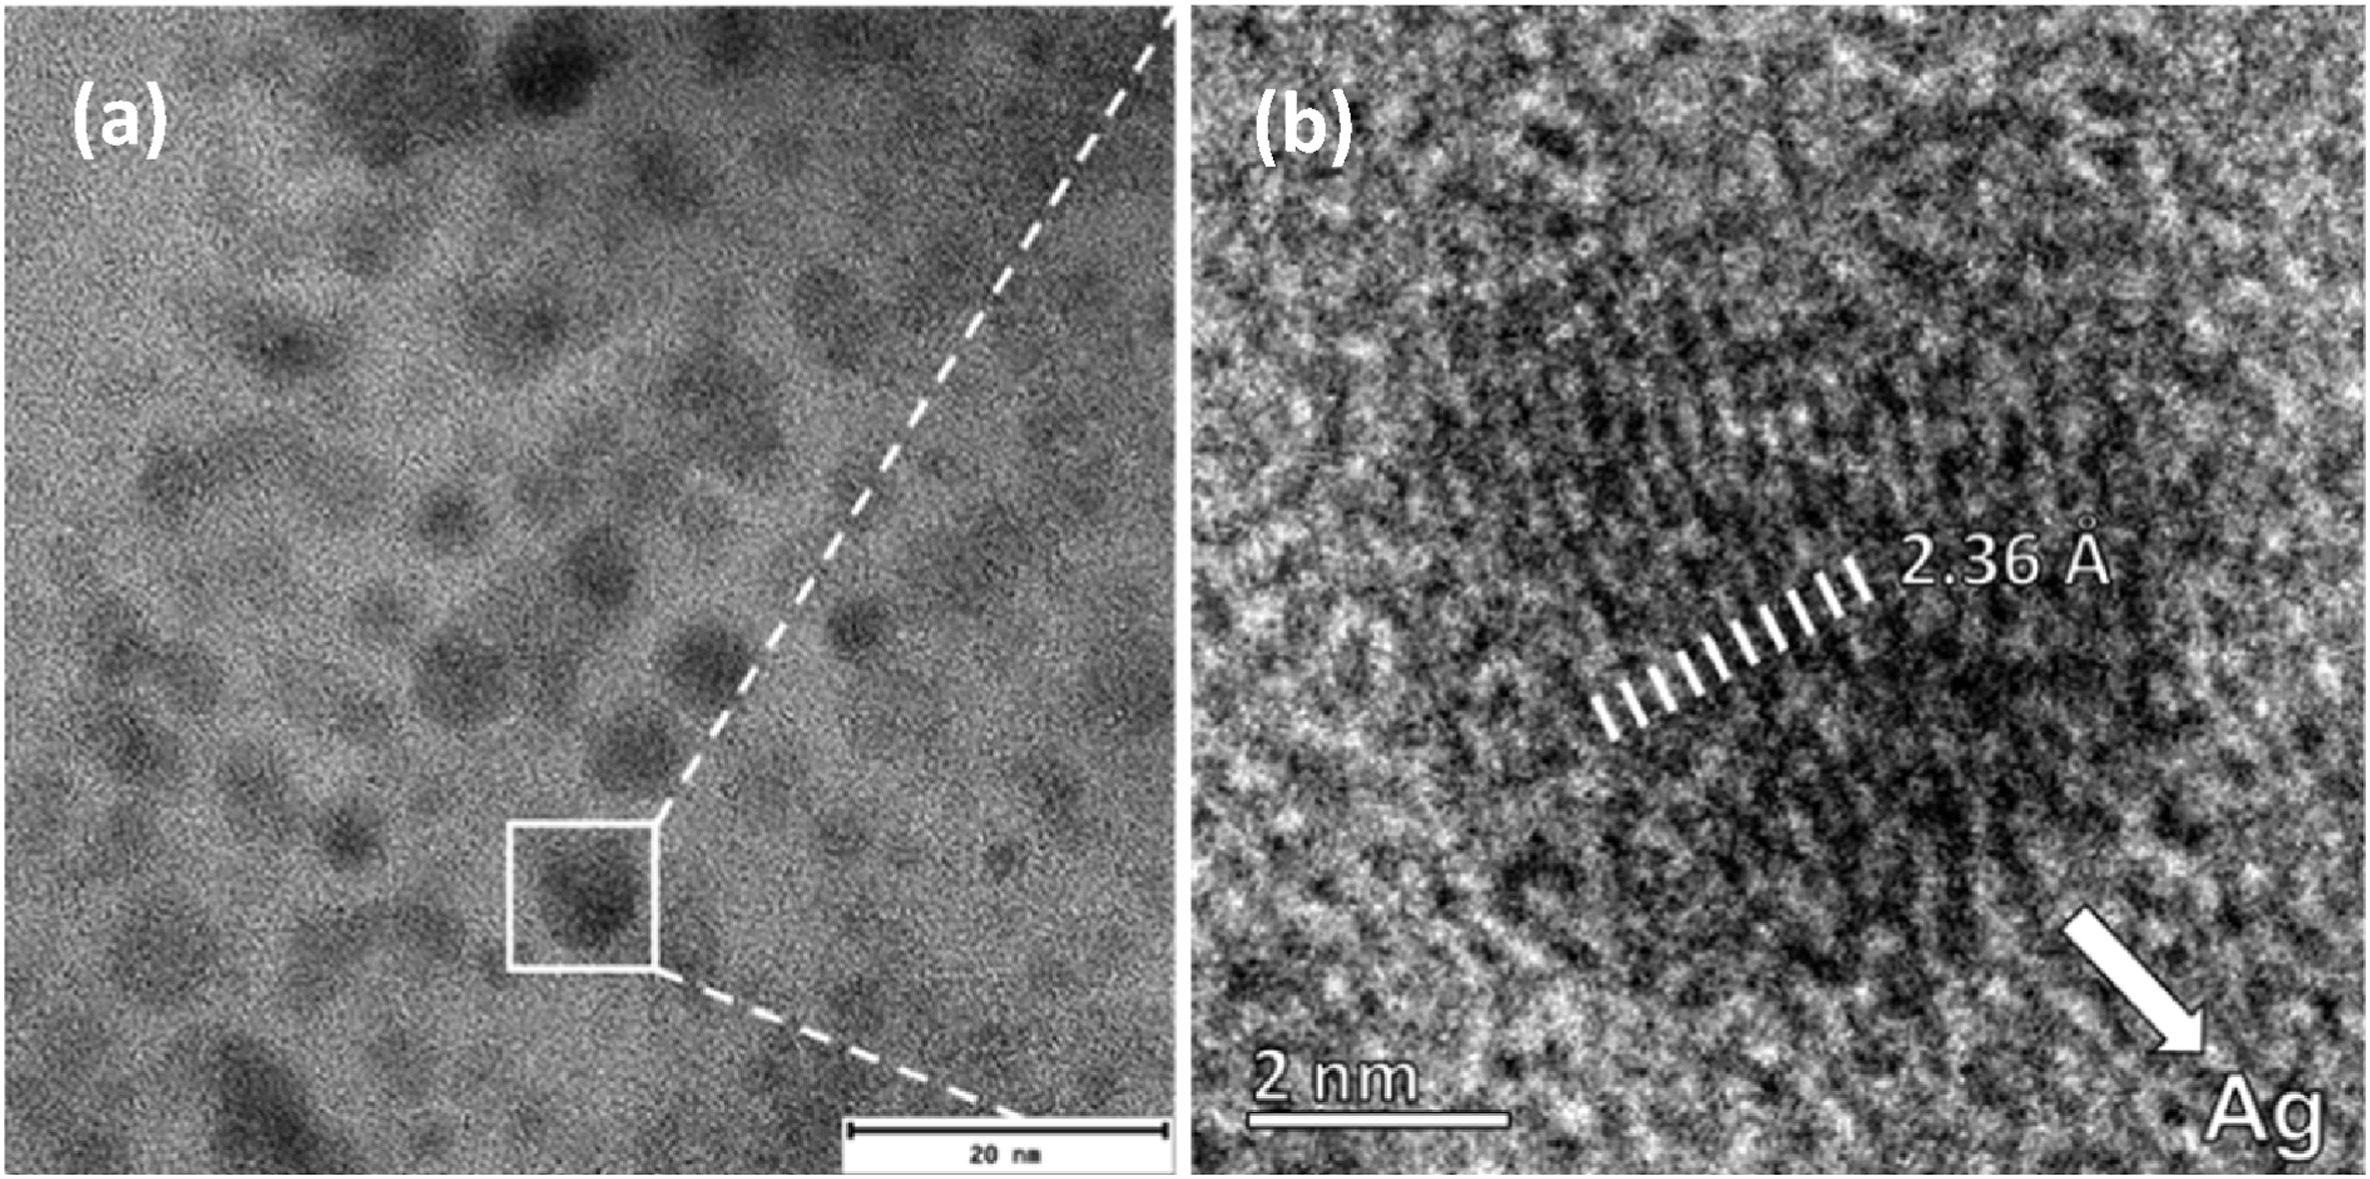 Influence of Au on the nucleation of Ag nanoparticles in GeO2-PbO glasses and characterization of their ultrafast third-order nonlinear responses within the plasmon resonance region.